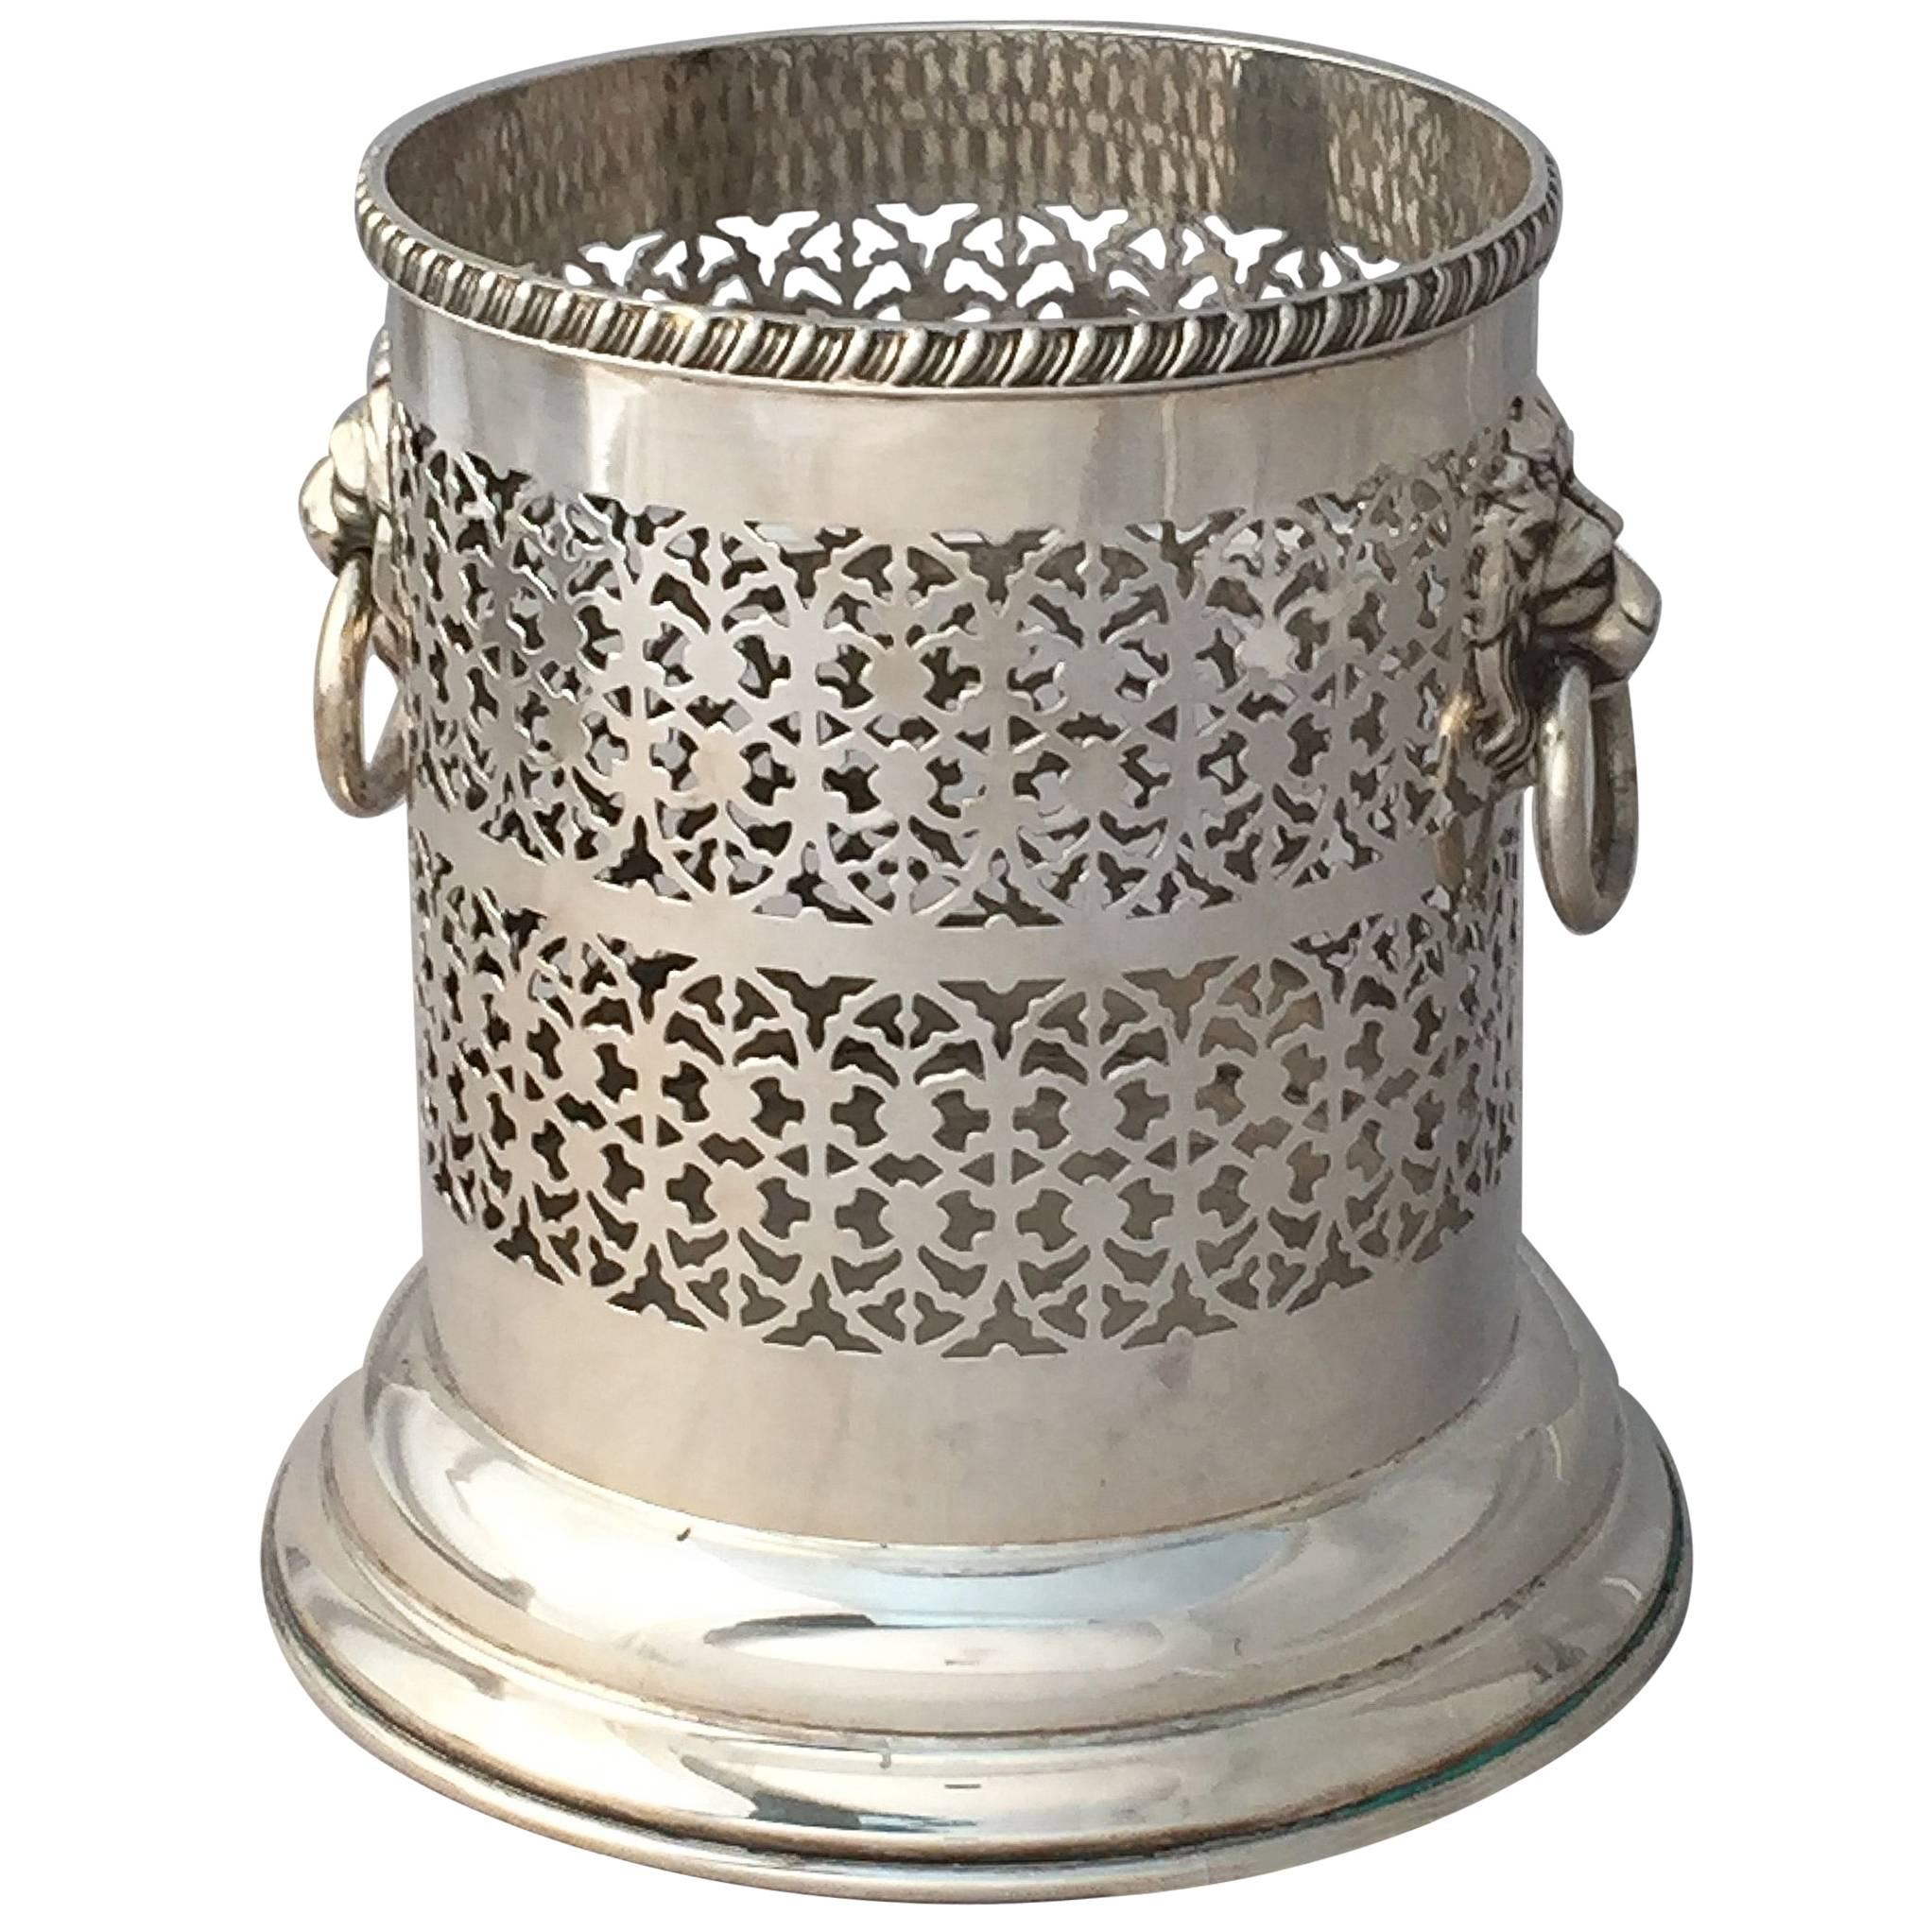 A fine English wine bottle display holder or coaster of plate silver, featuring a pierced design around the circumference and opposing Regency lion ring pull handles, with rolled edge around the top.

Designed to add a fine level of elegance to